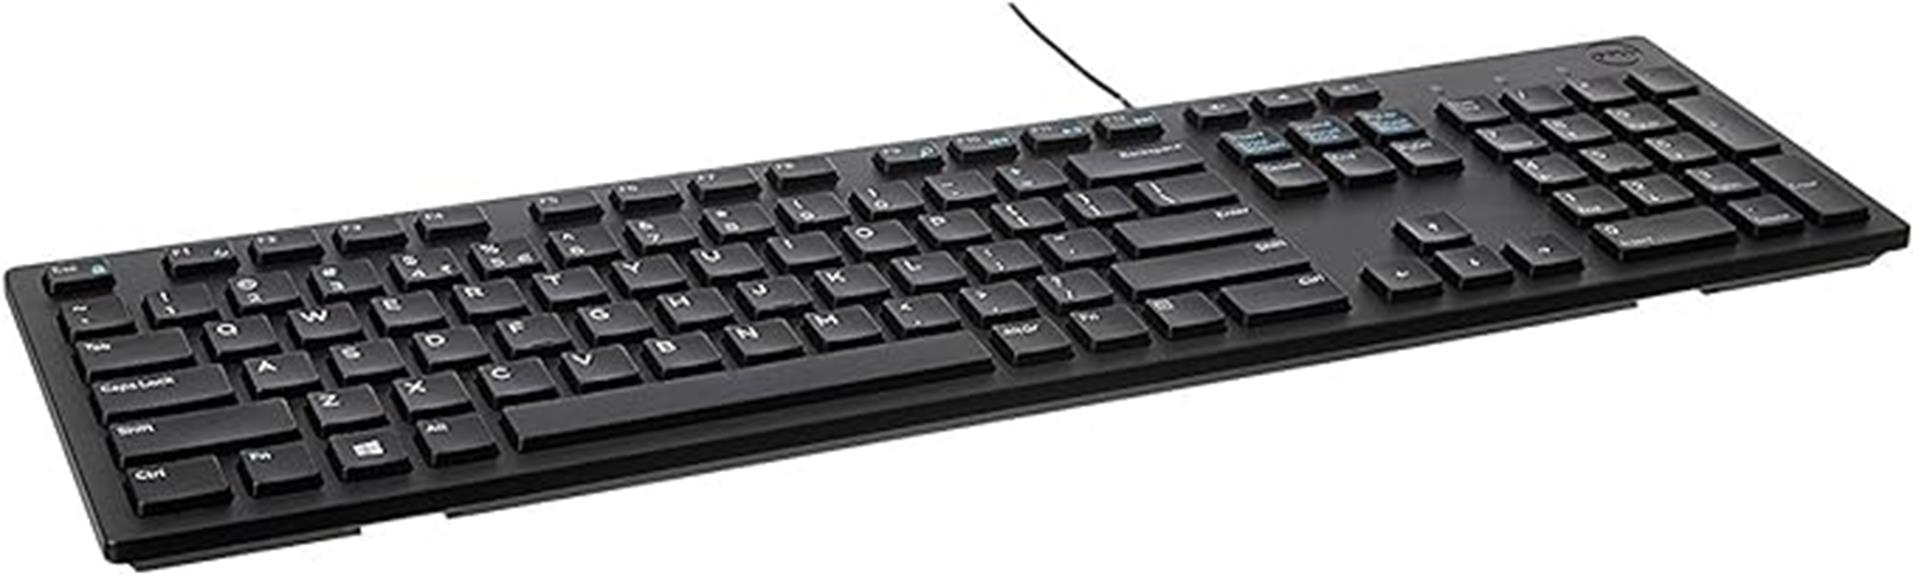 affordable and reliable keyboard